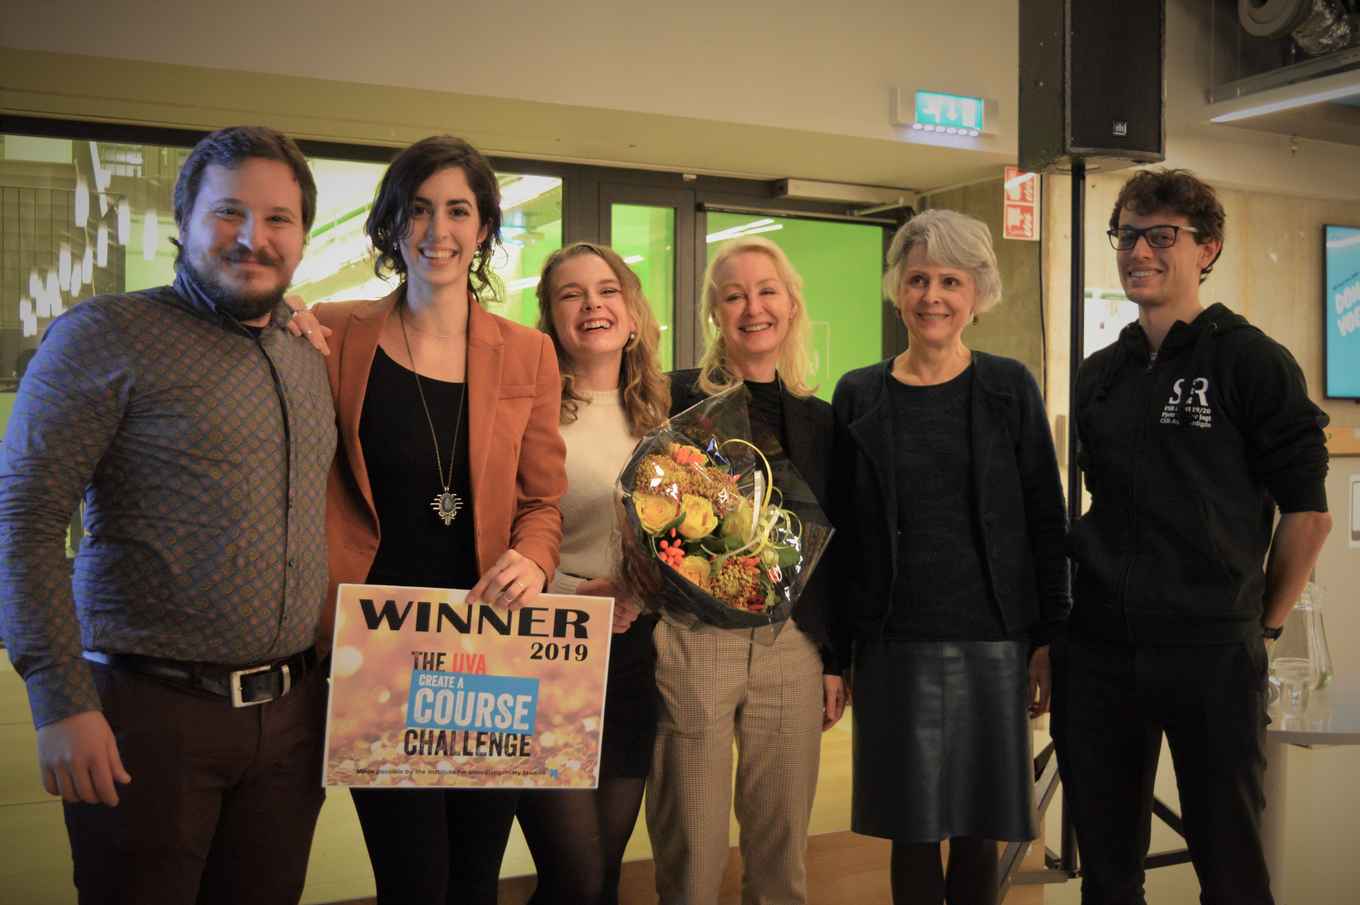 The winning group and the jury of the Create a Course Challenge 2019